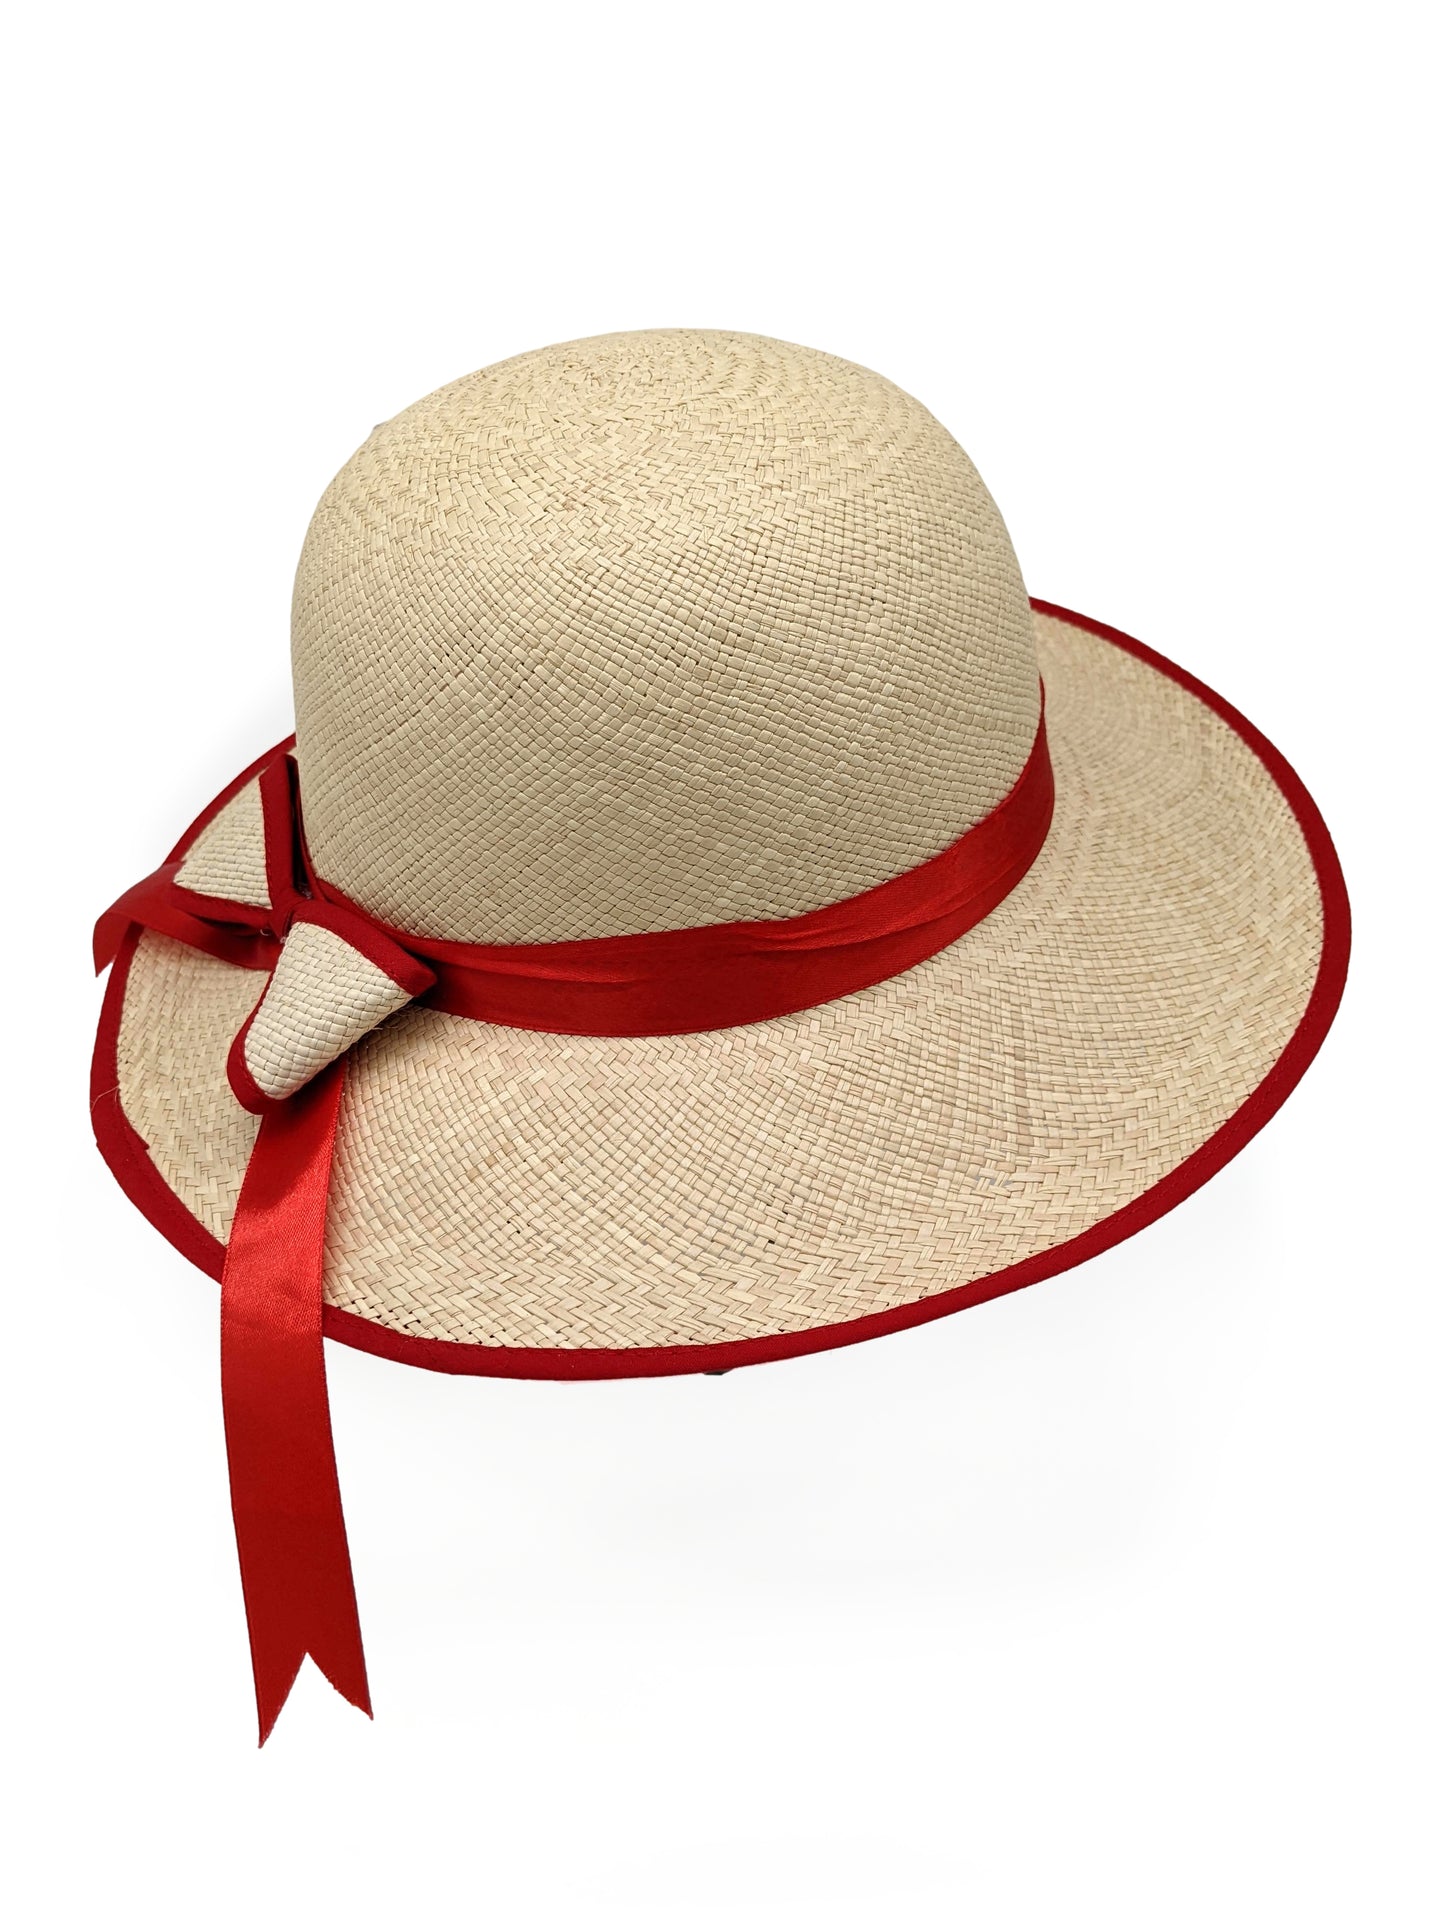 Ladies Panama Hat with Red Bow